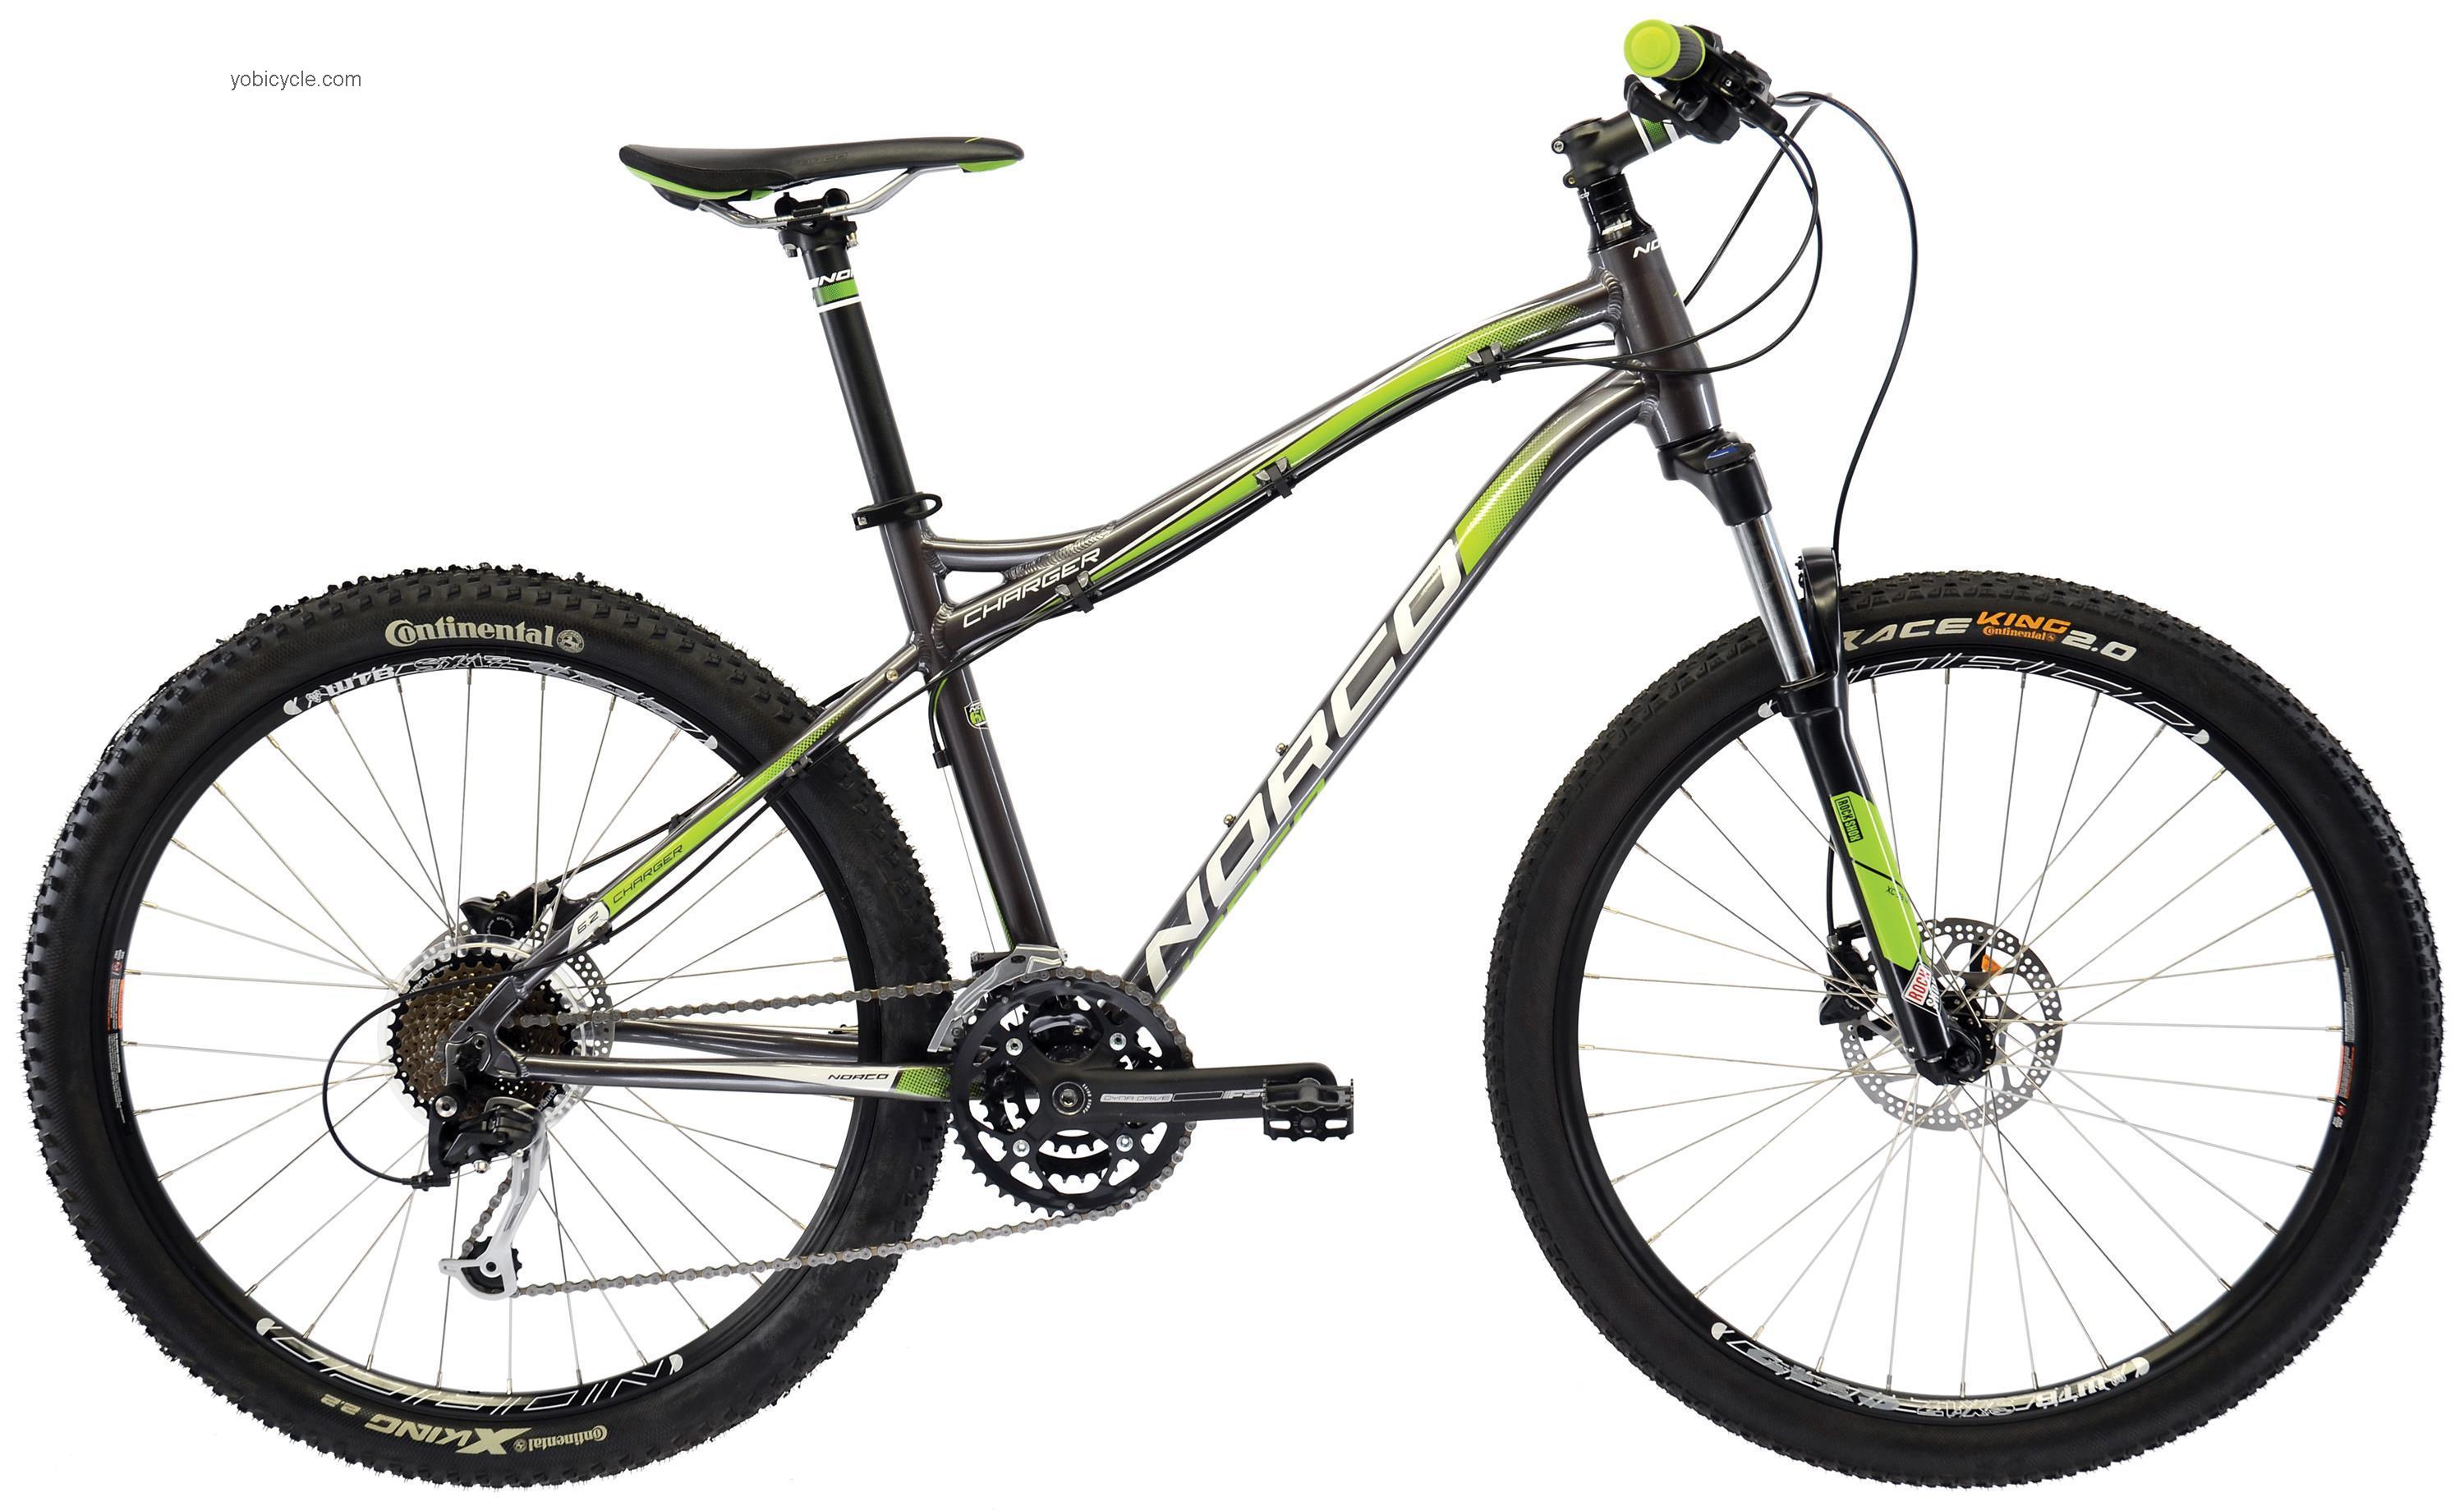 Norco Charger 6.2 2012 comparison online with competitors